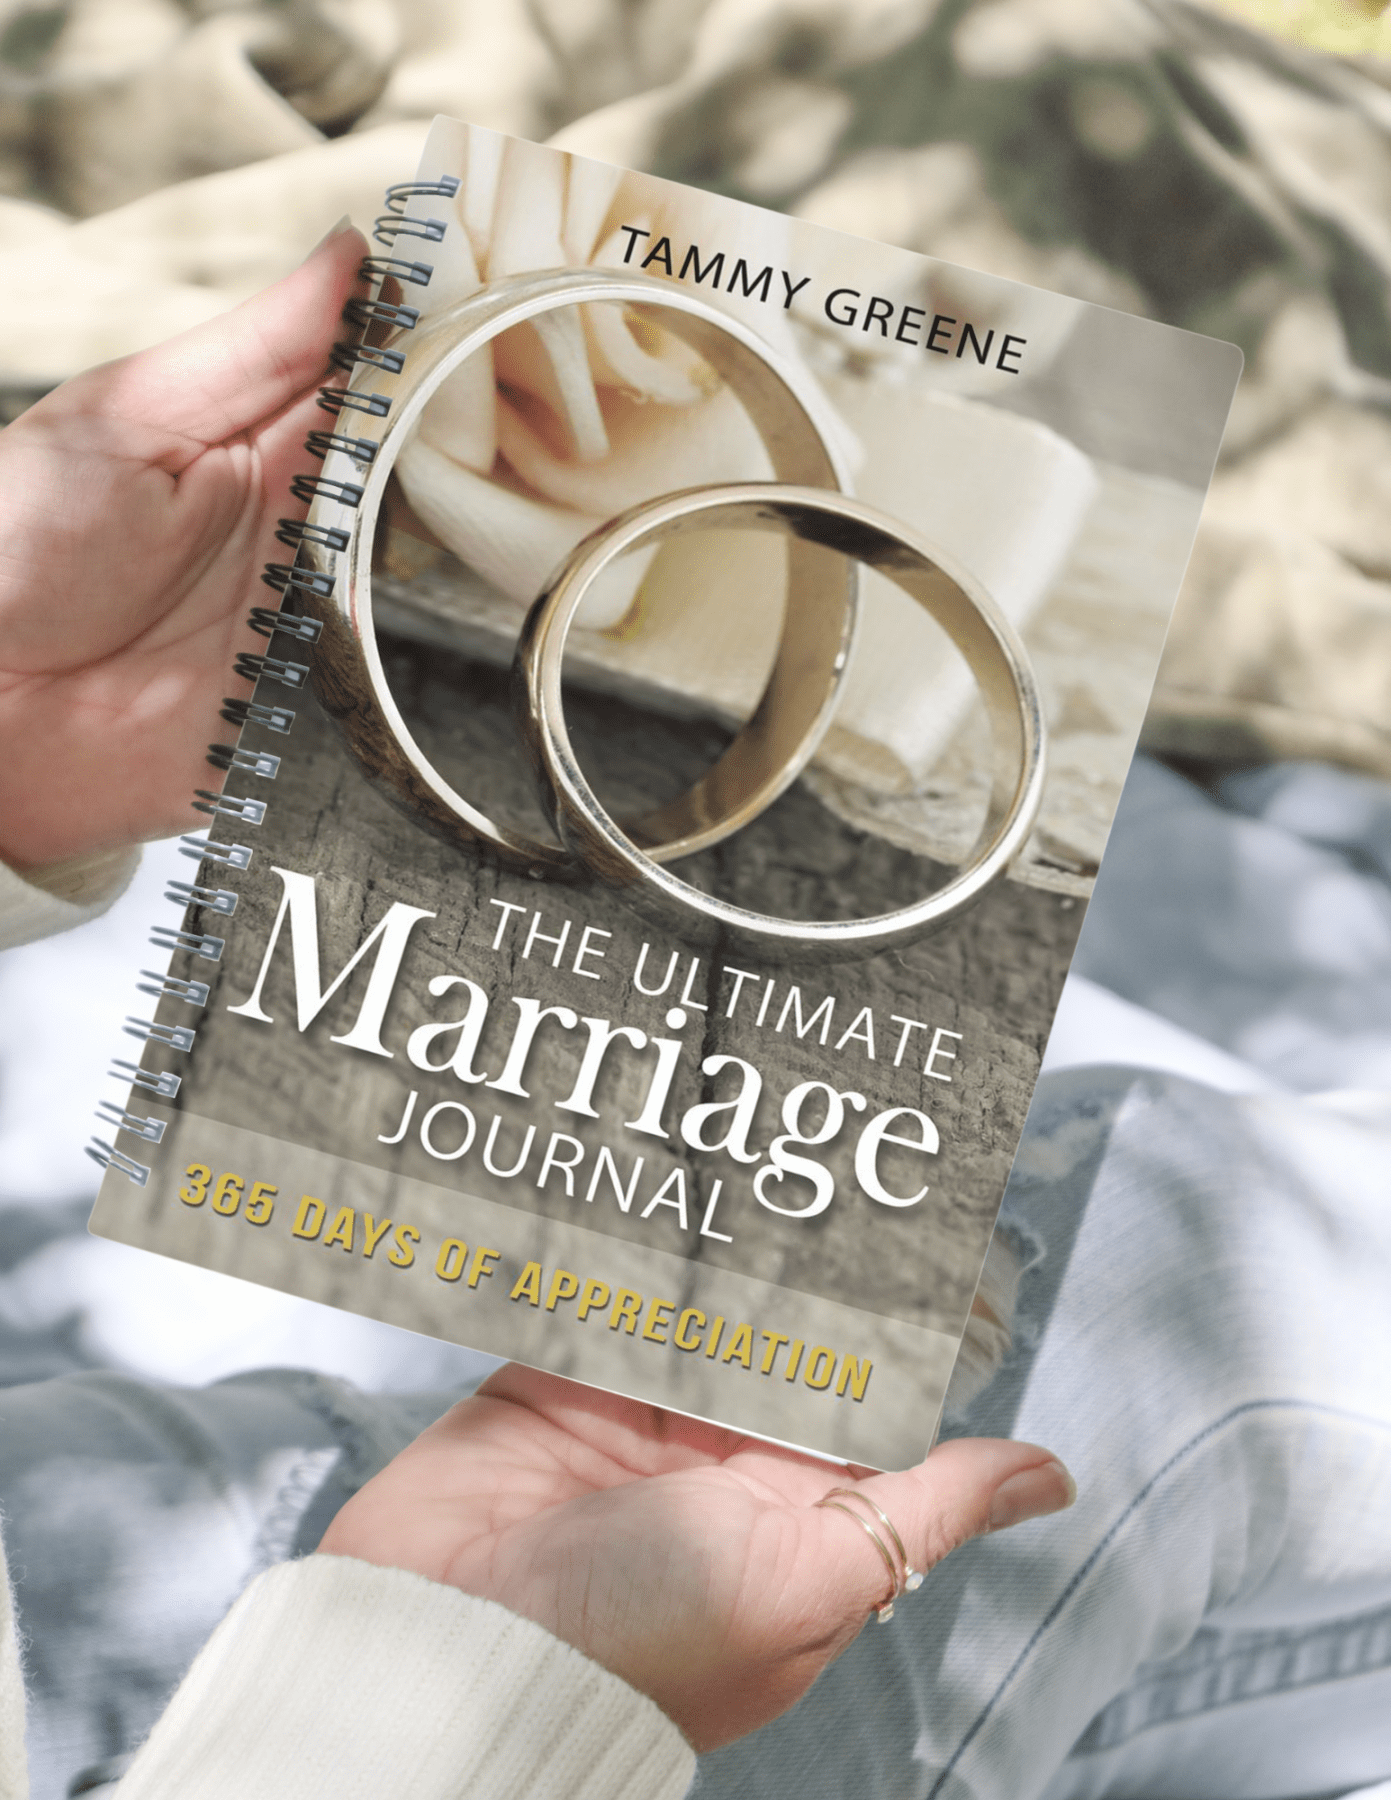 Holding The Ultimate Marriage Journal